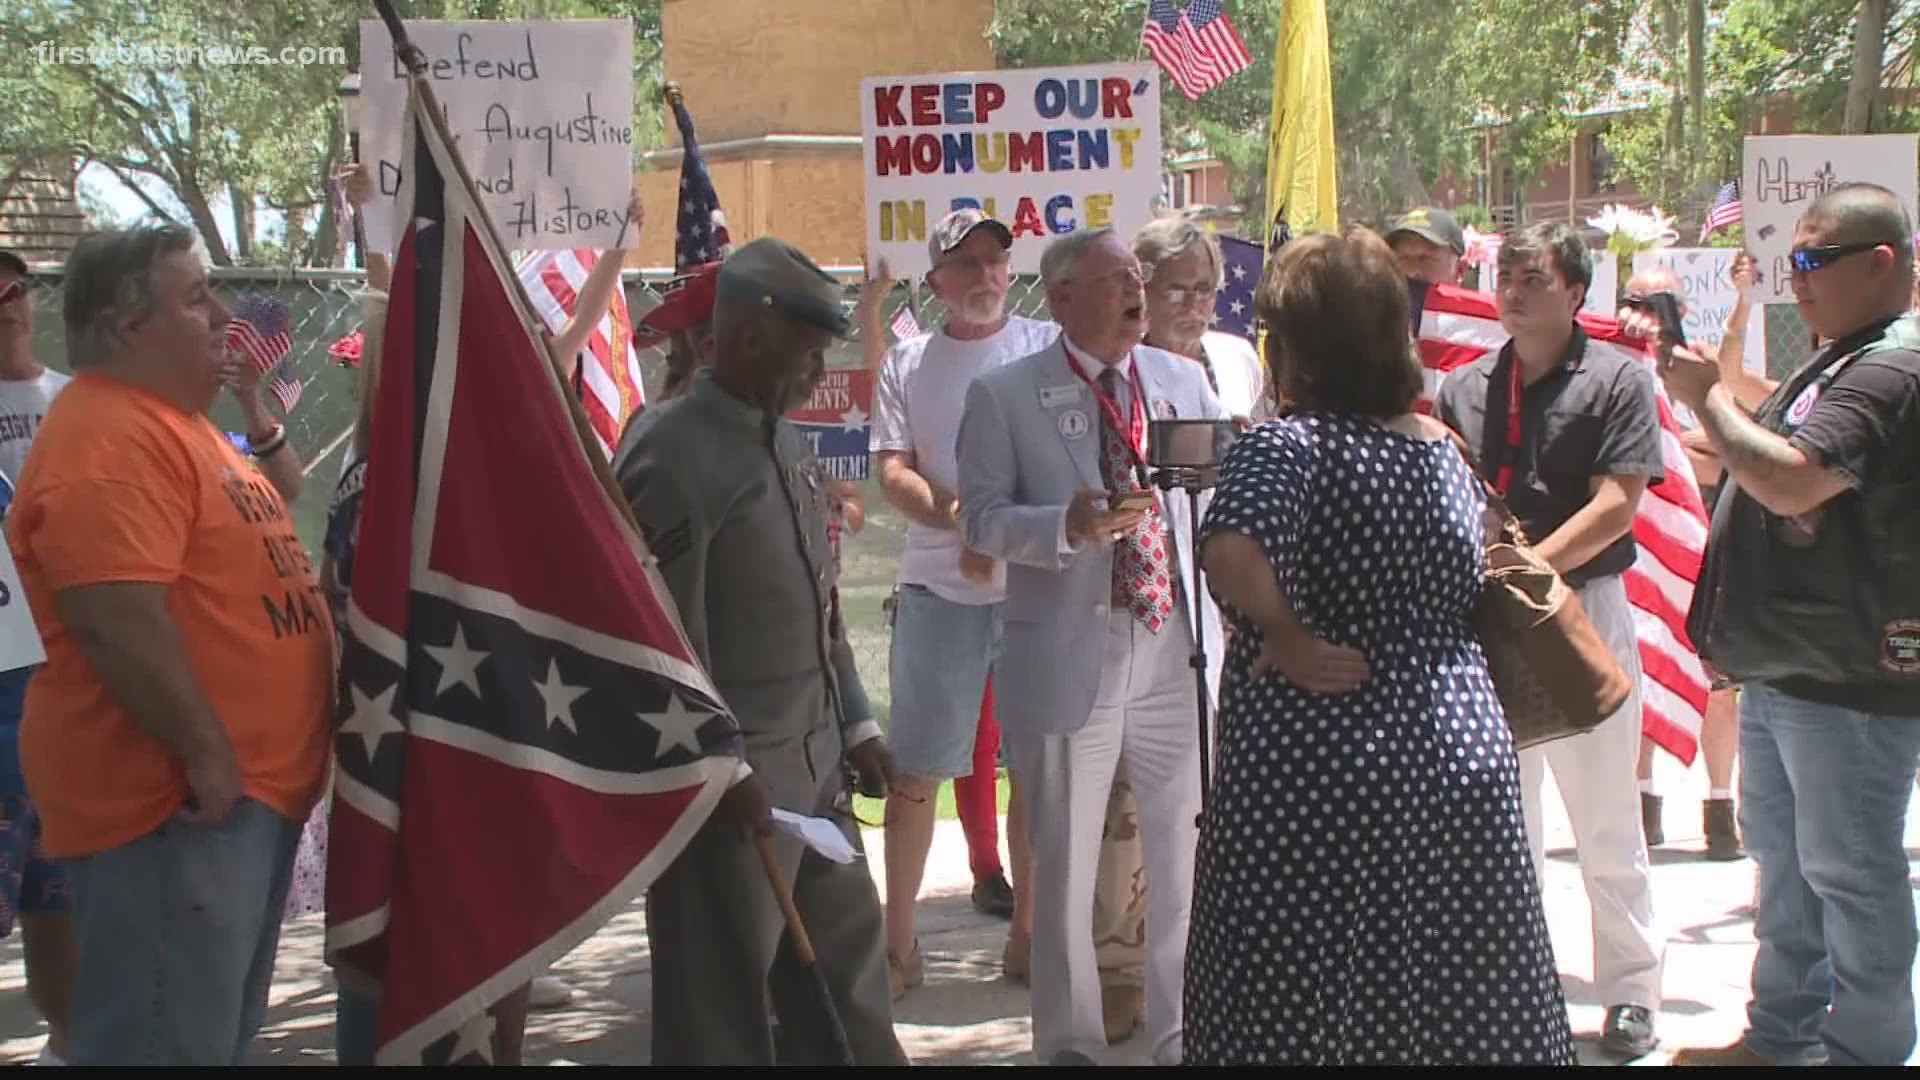 A group of protesters gathered at the Plaza de la Constitution Saturday, protesting against the removal of the city's Confederate monuments.